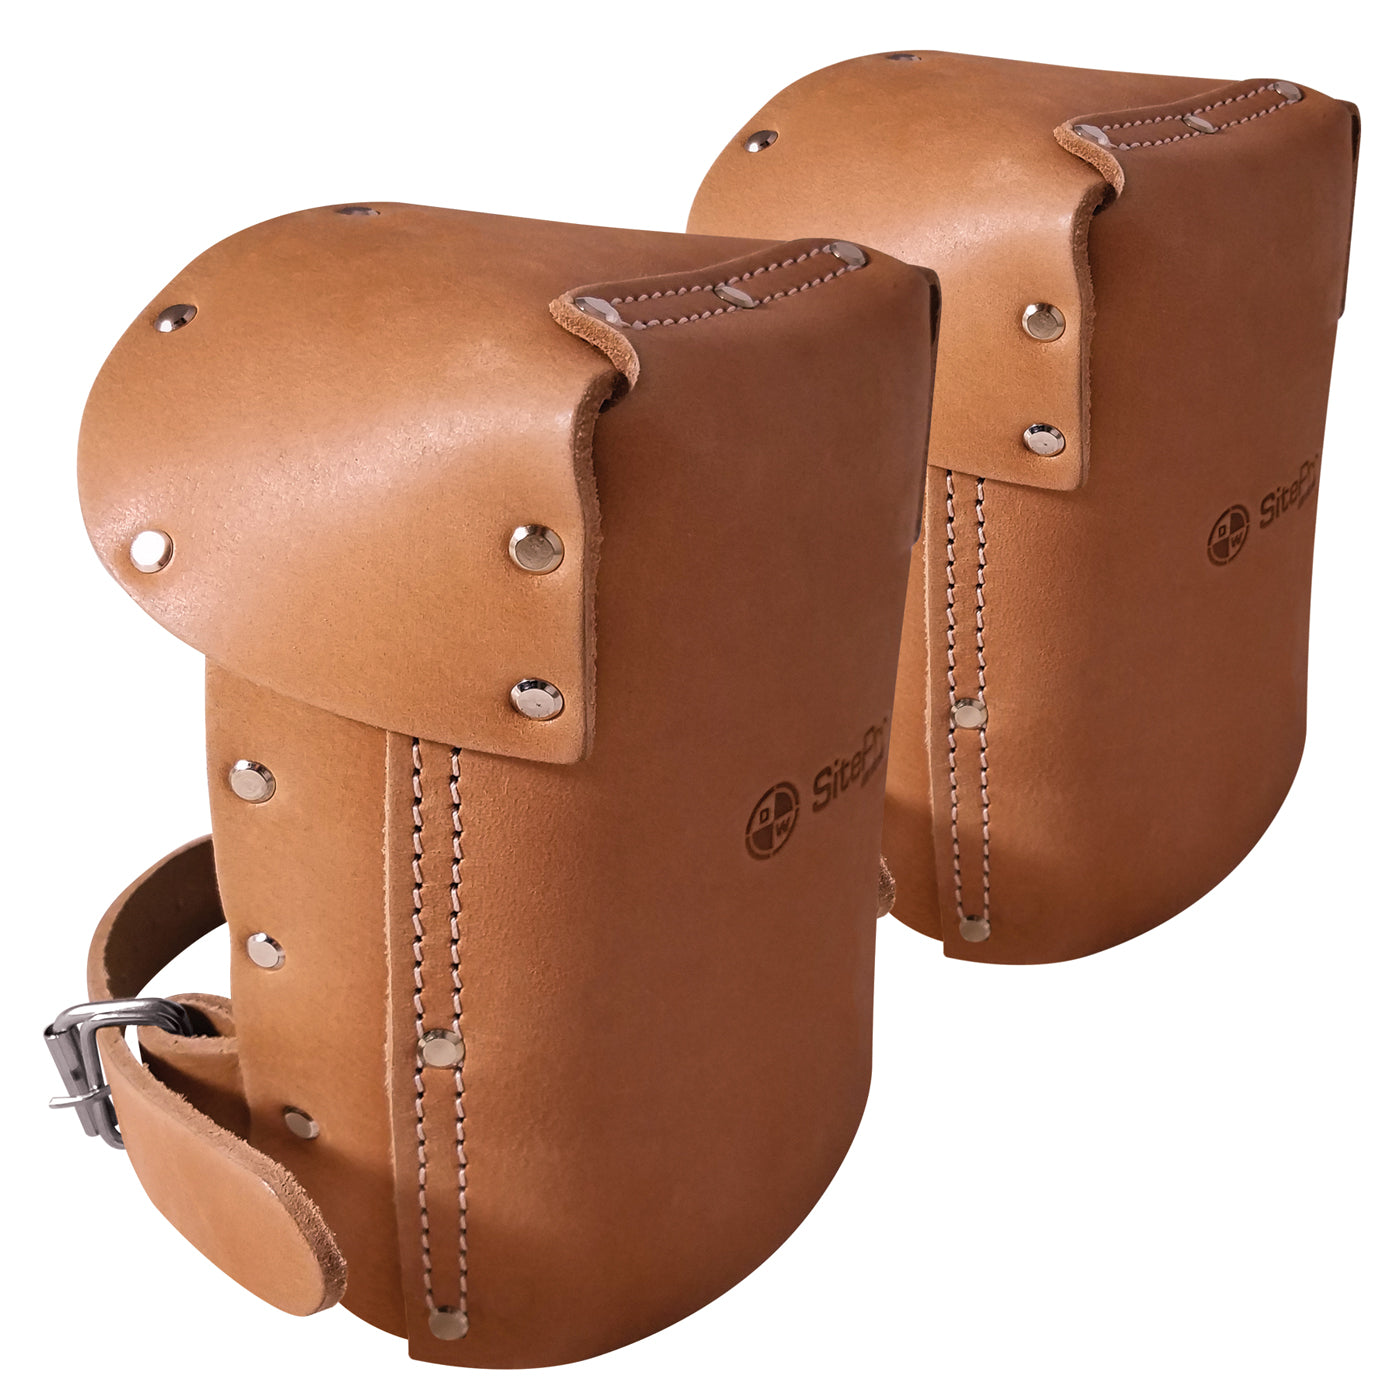 SITEGEAR Padded Leather Knee Pads with Adjustable Strap